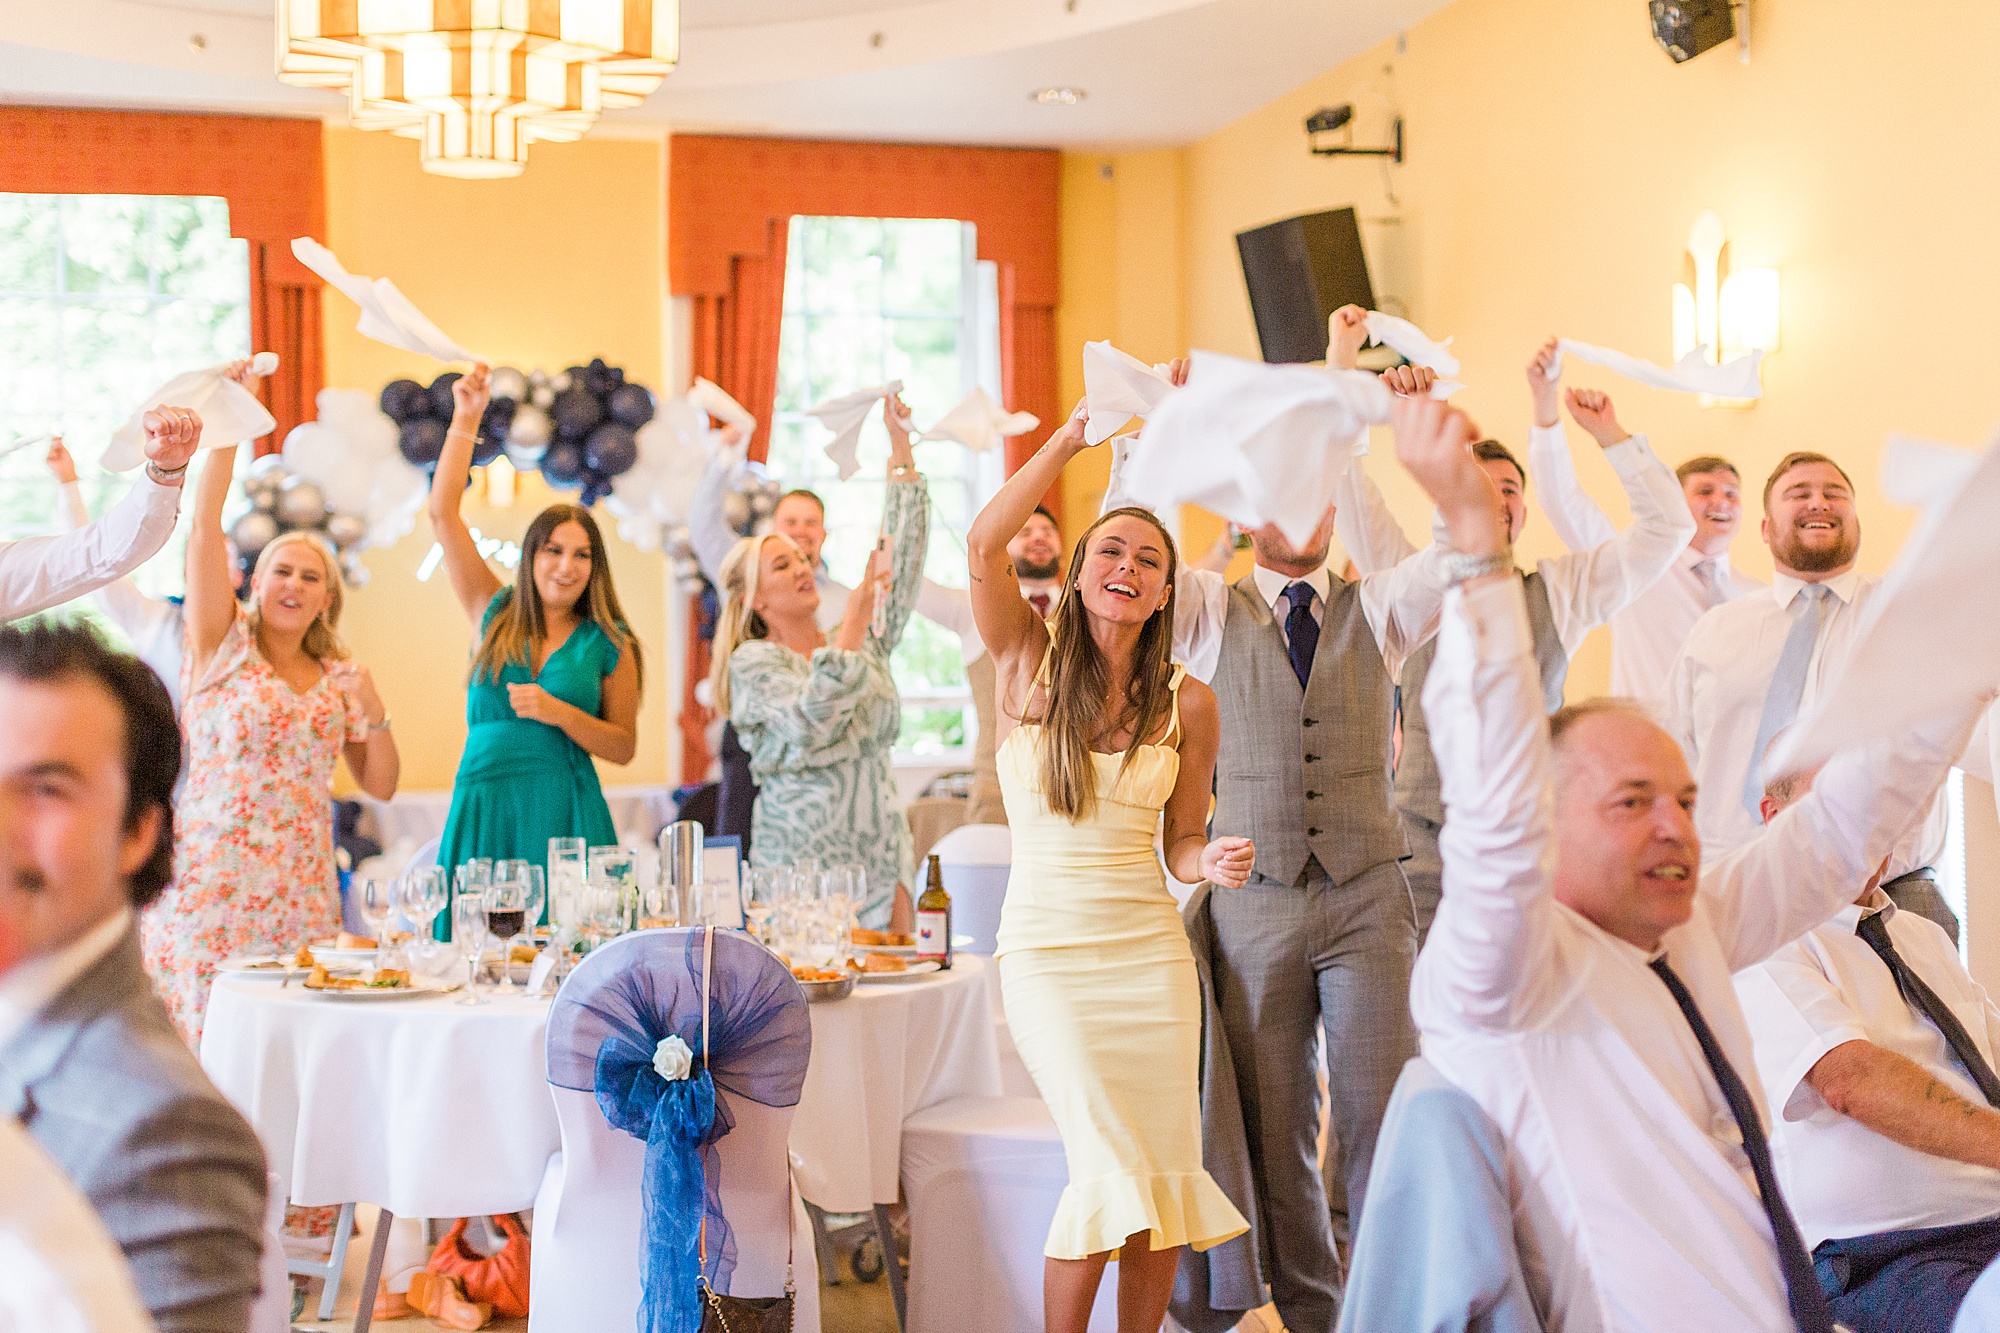 wedding guests holding their napkins stood singing and dancing to singing waiters at a wedding reception - image shows so much fun and enjoyment